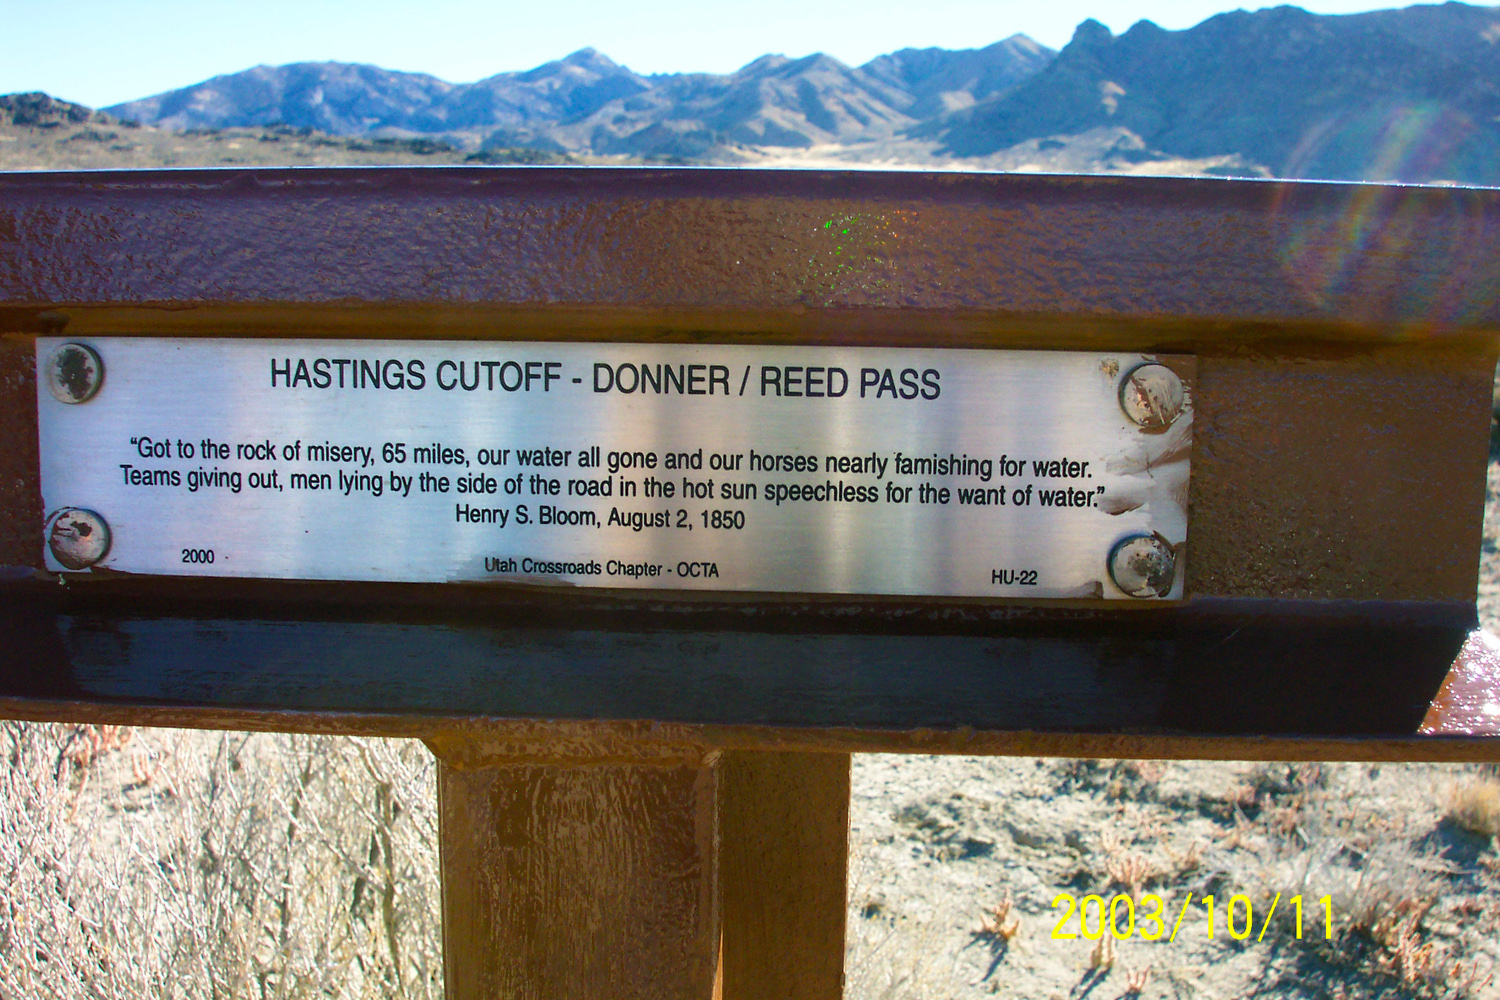 Hastings Cutoff - Donner/Reed Pass